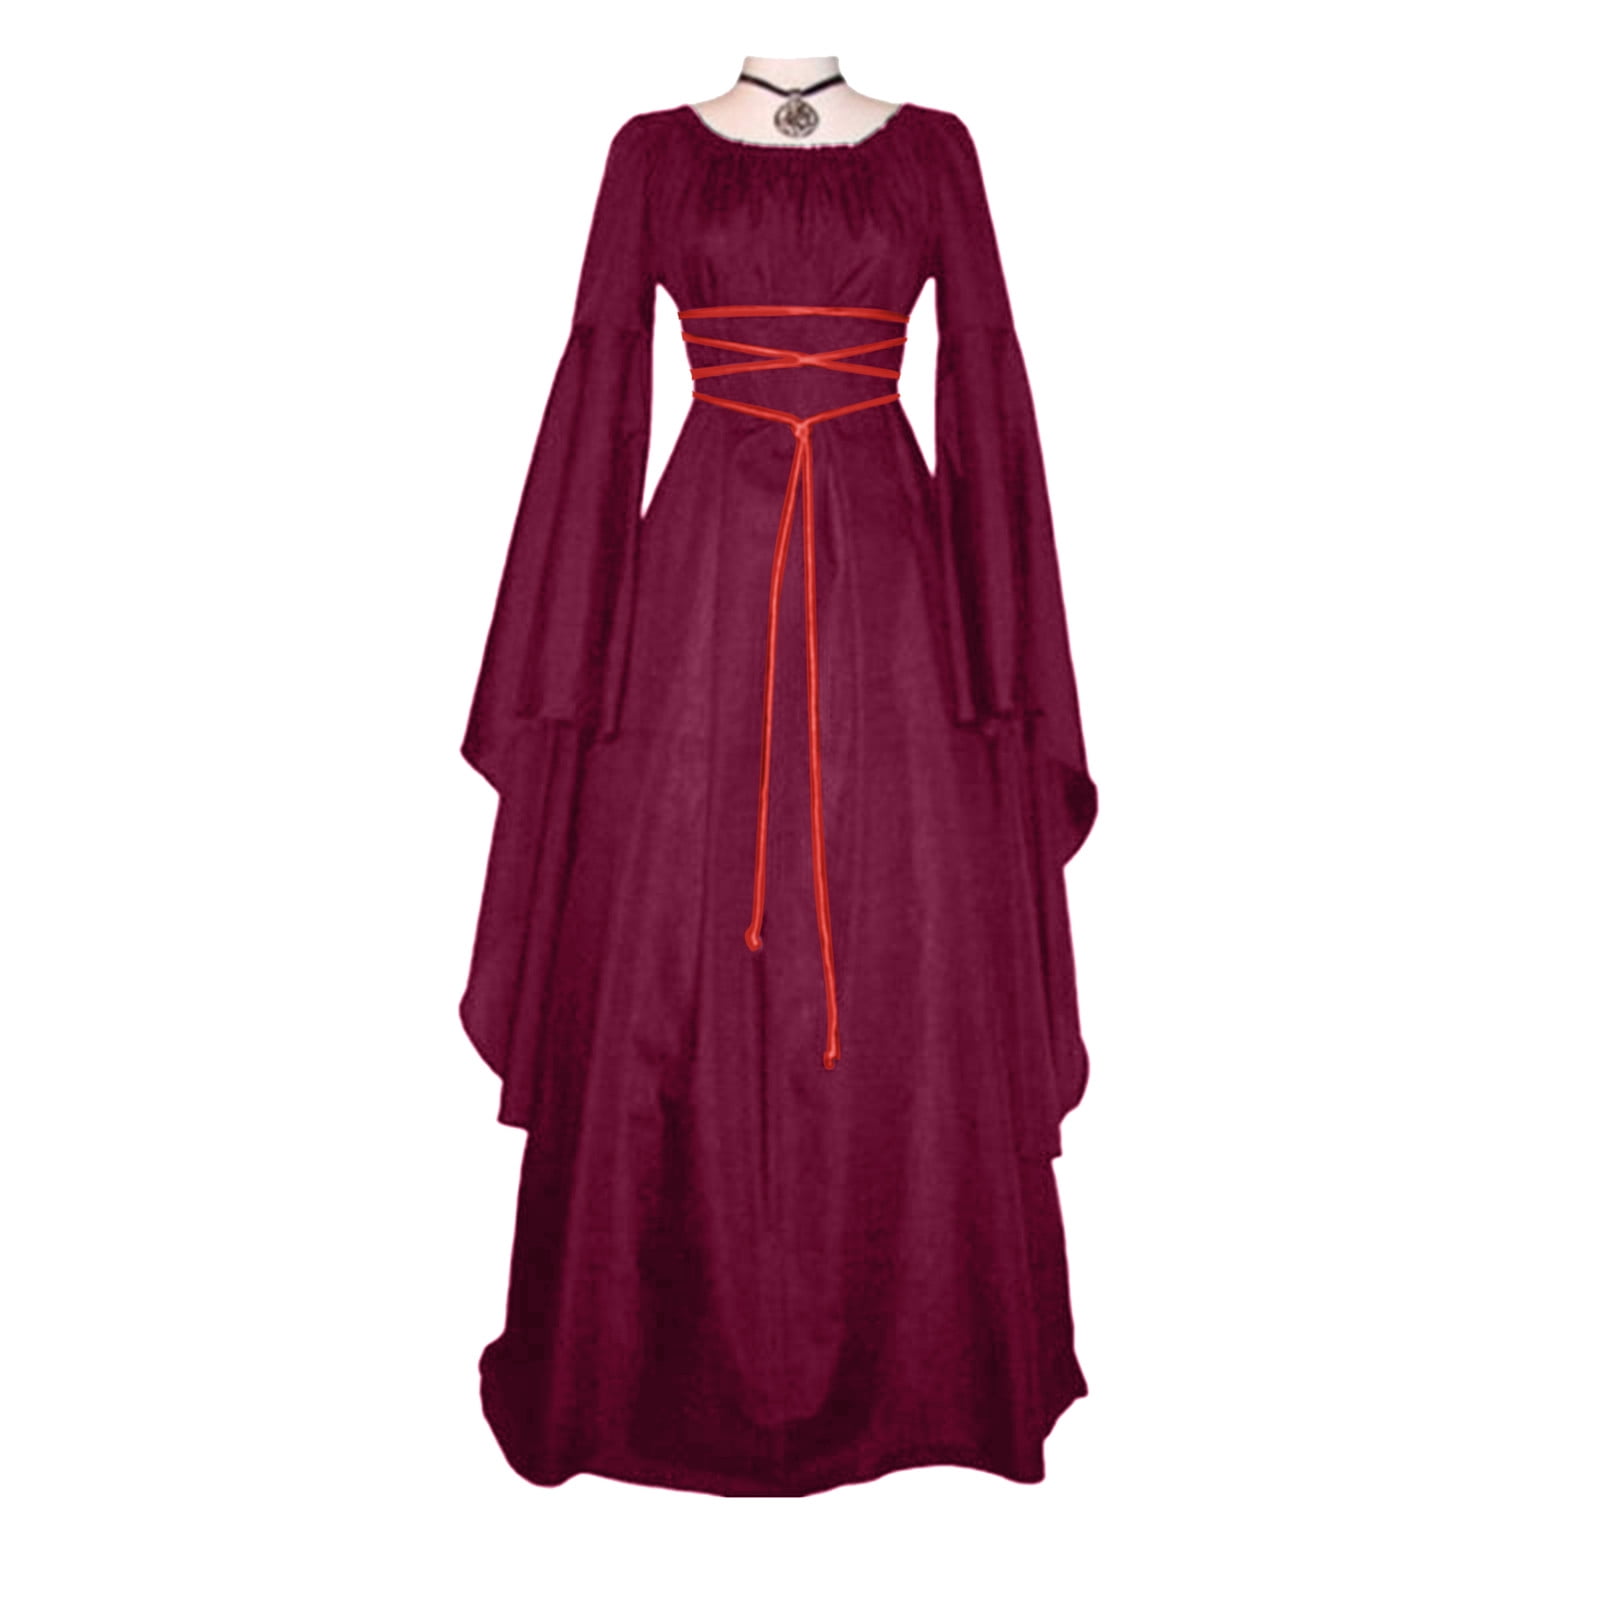 Maxi Dress For Women Retro Gothic Gown Dress Long Sleeve Lace Up ...